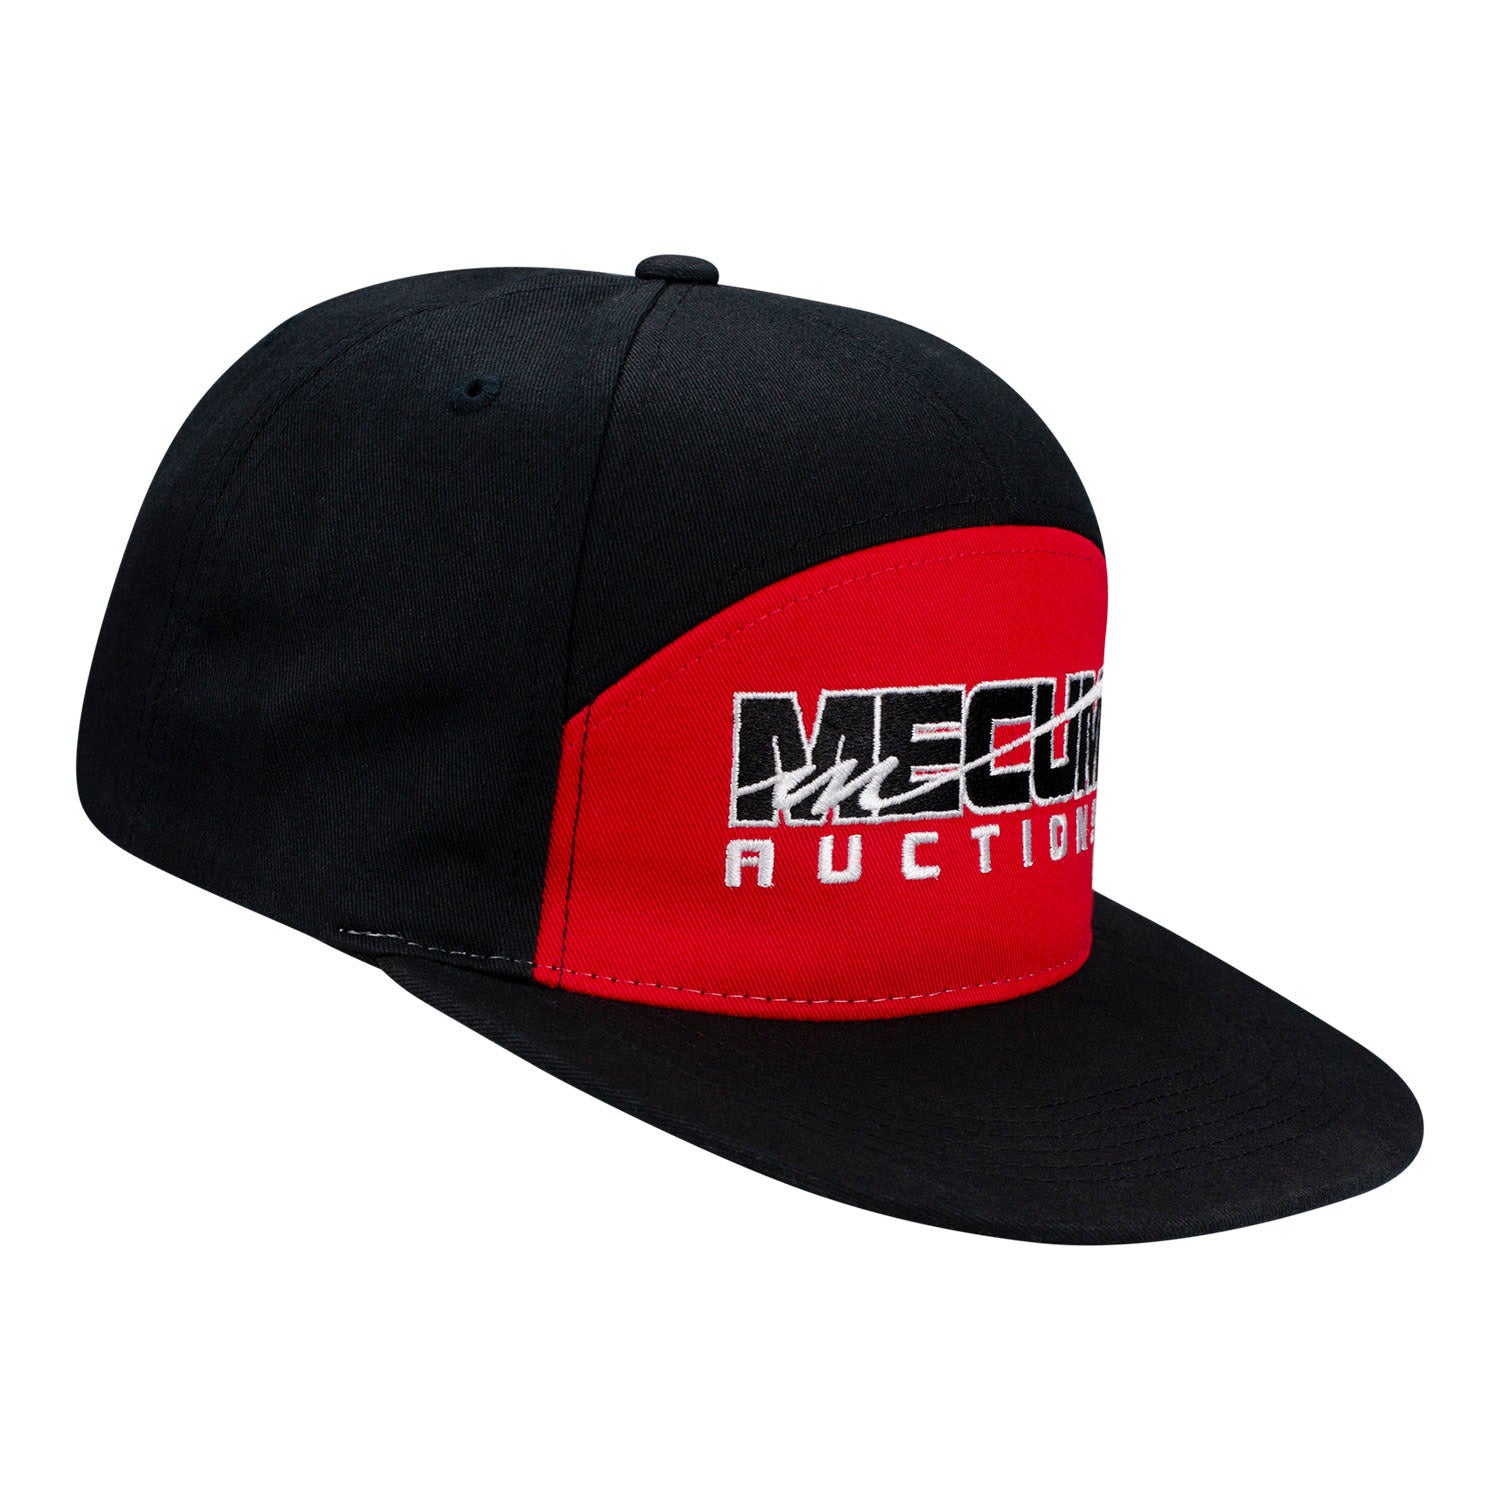 Primary Logo Red/Black Snapback - Front Left Side View